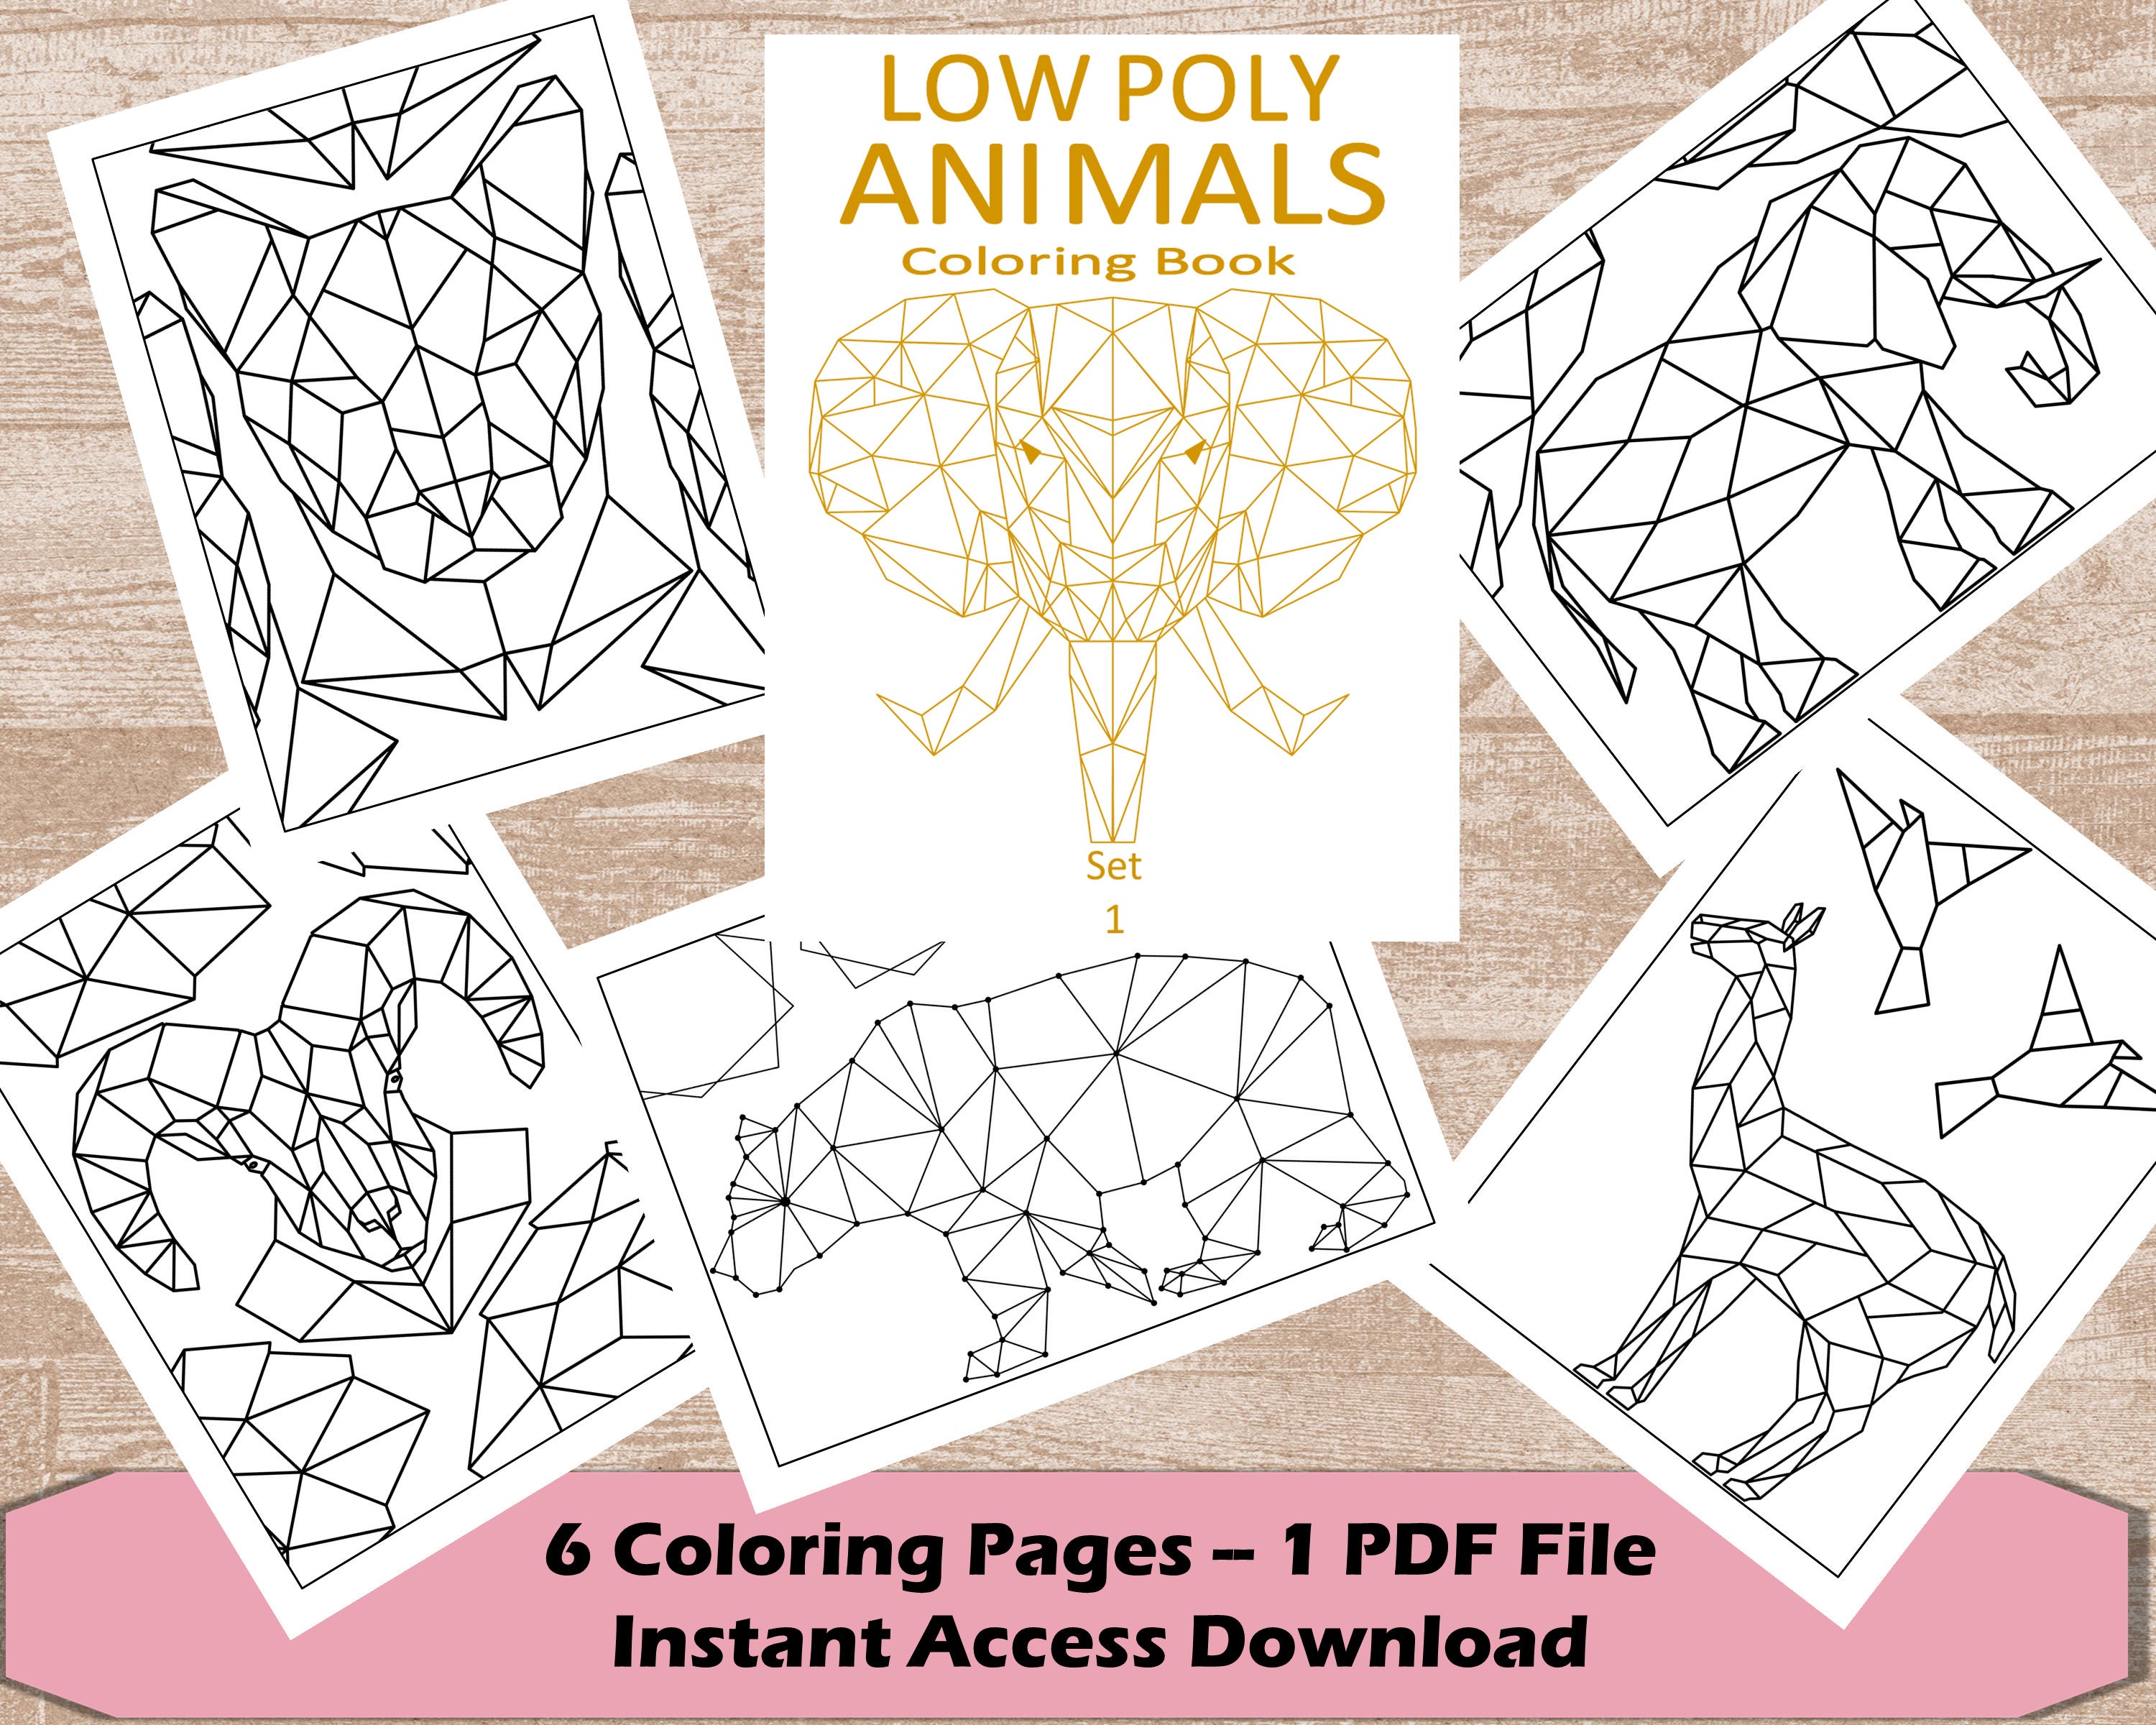 Low Poly Animals Coloring Set1 Nature Coloring Book Activities for